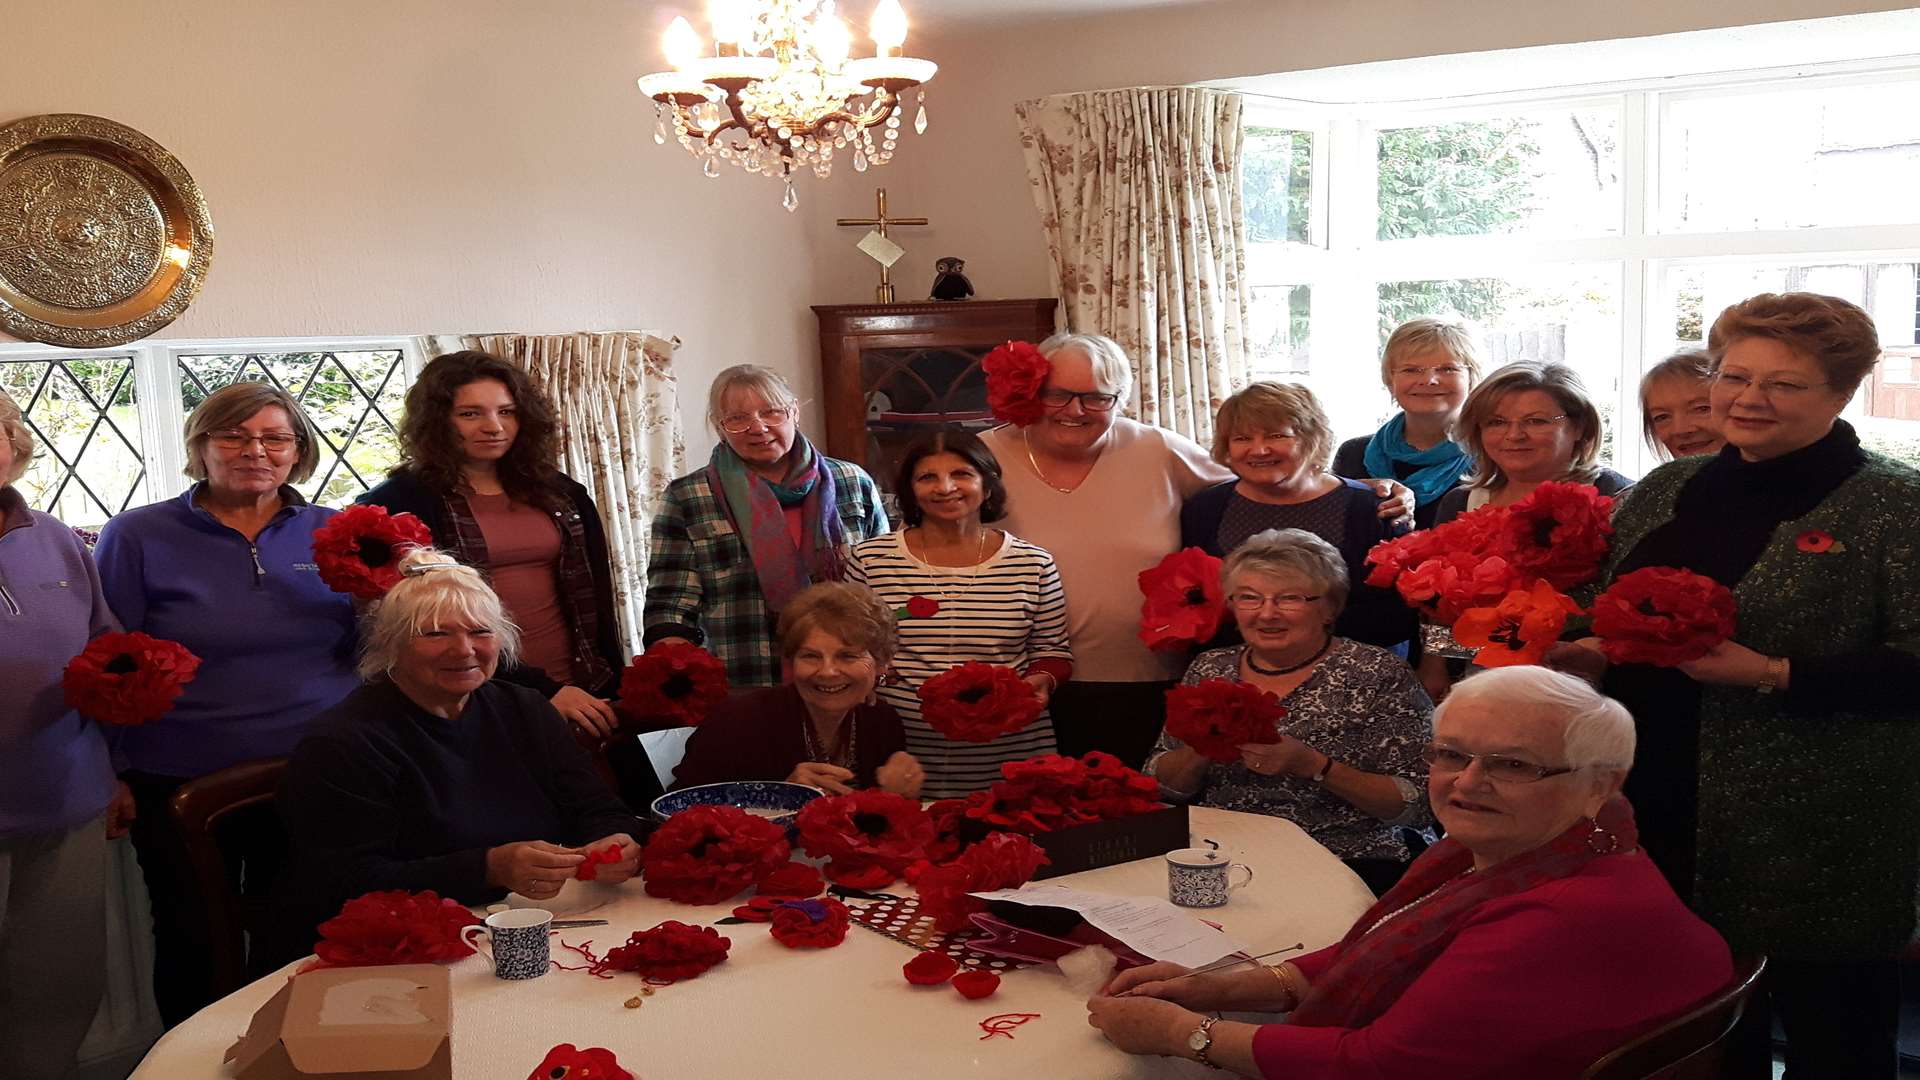 The DVD will show Masheeda Downing and her friends making and sorting through the poppies